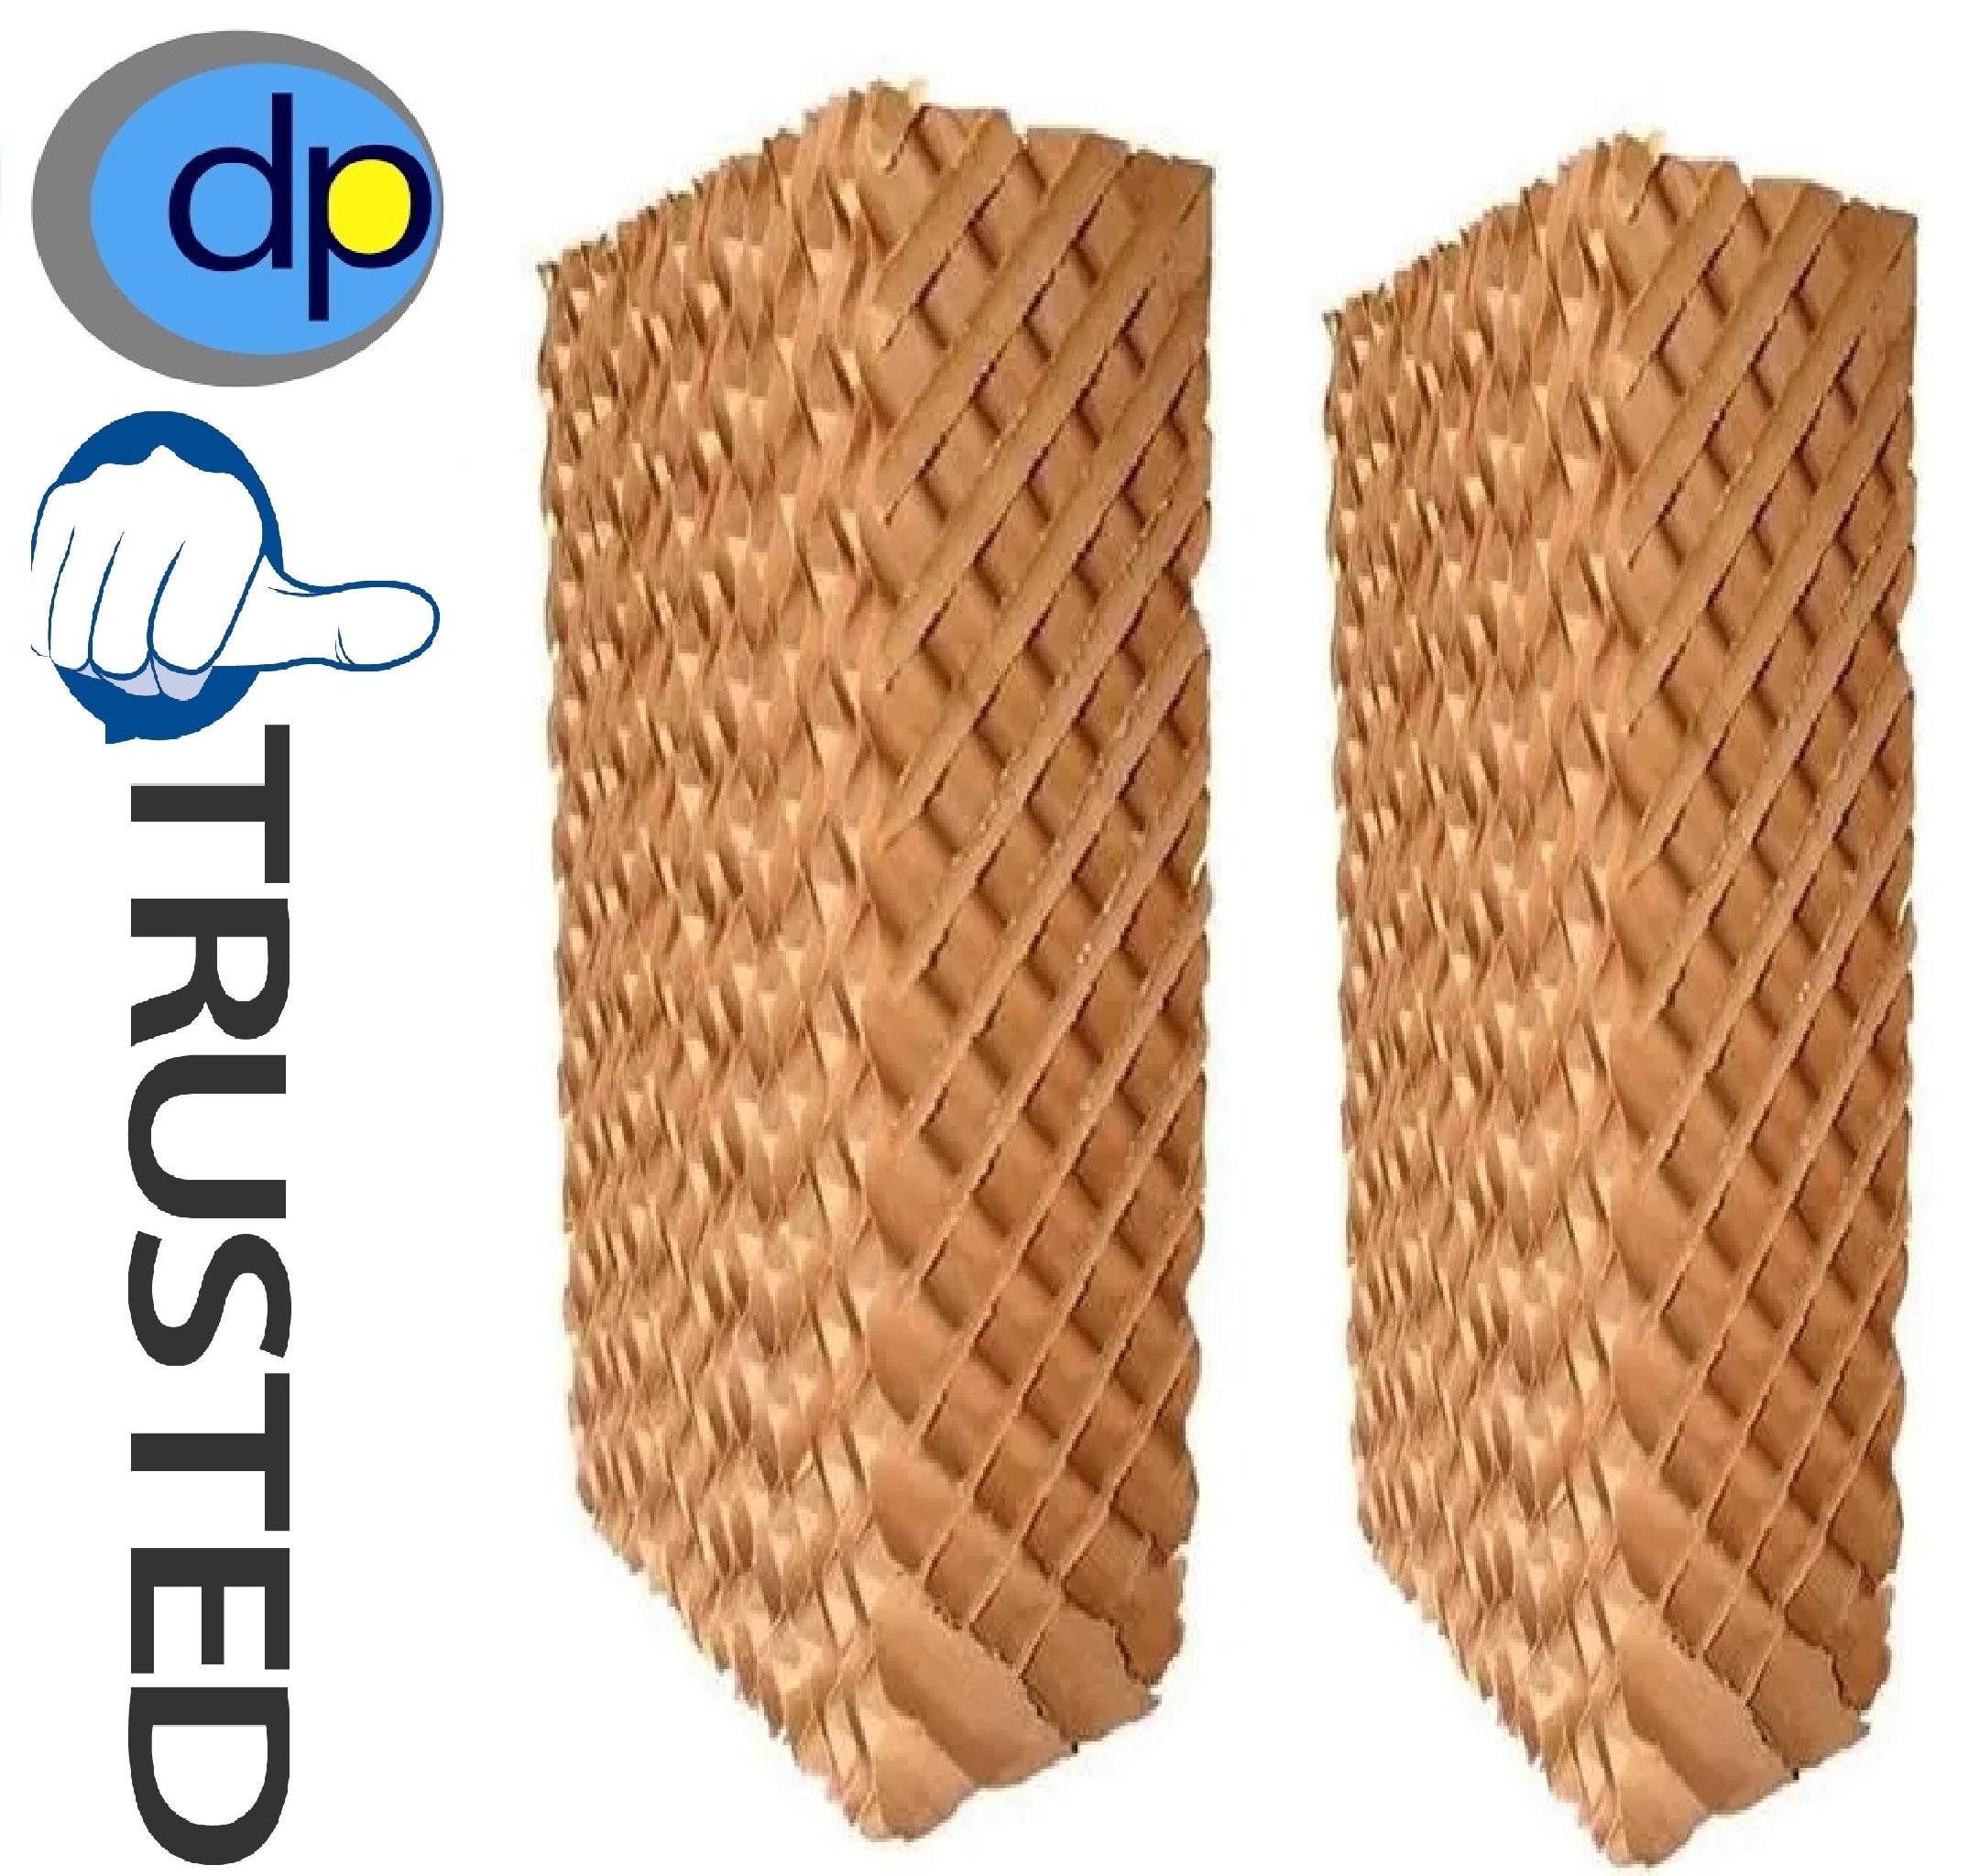 Cellulose cooling pad Manufacturers by Greater Noida